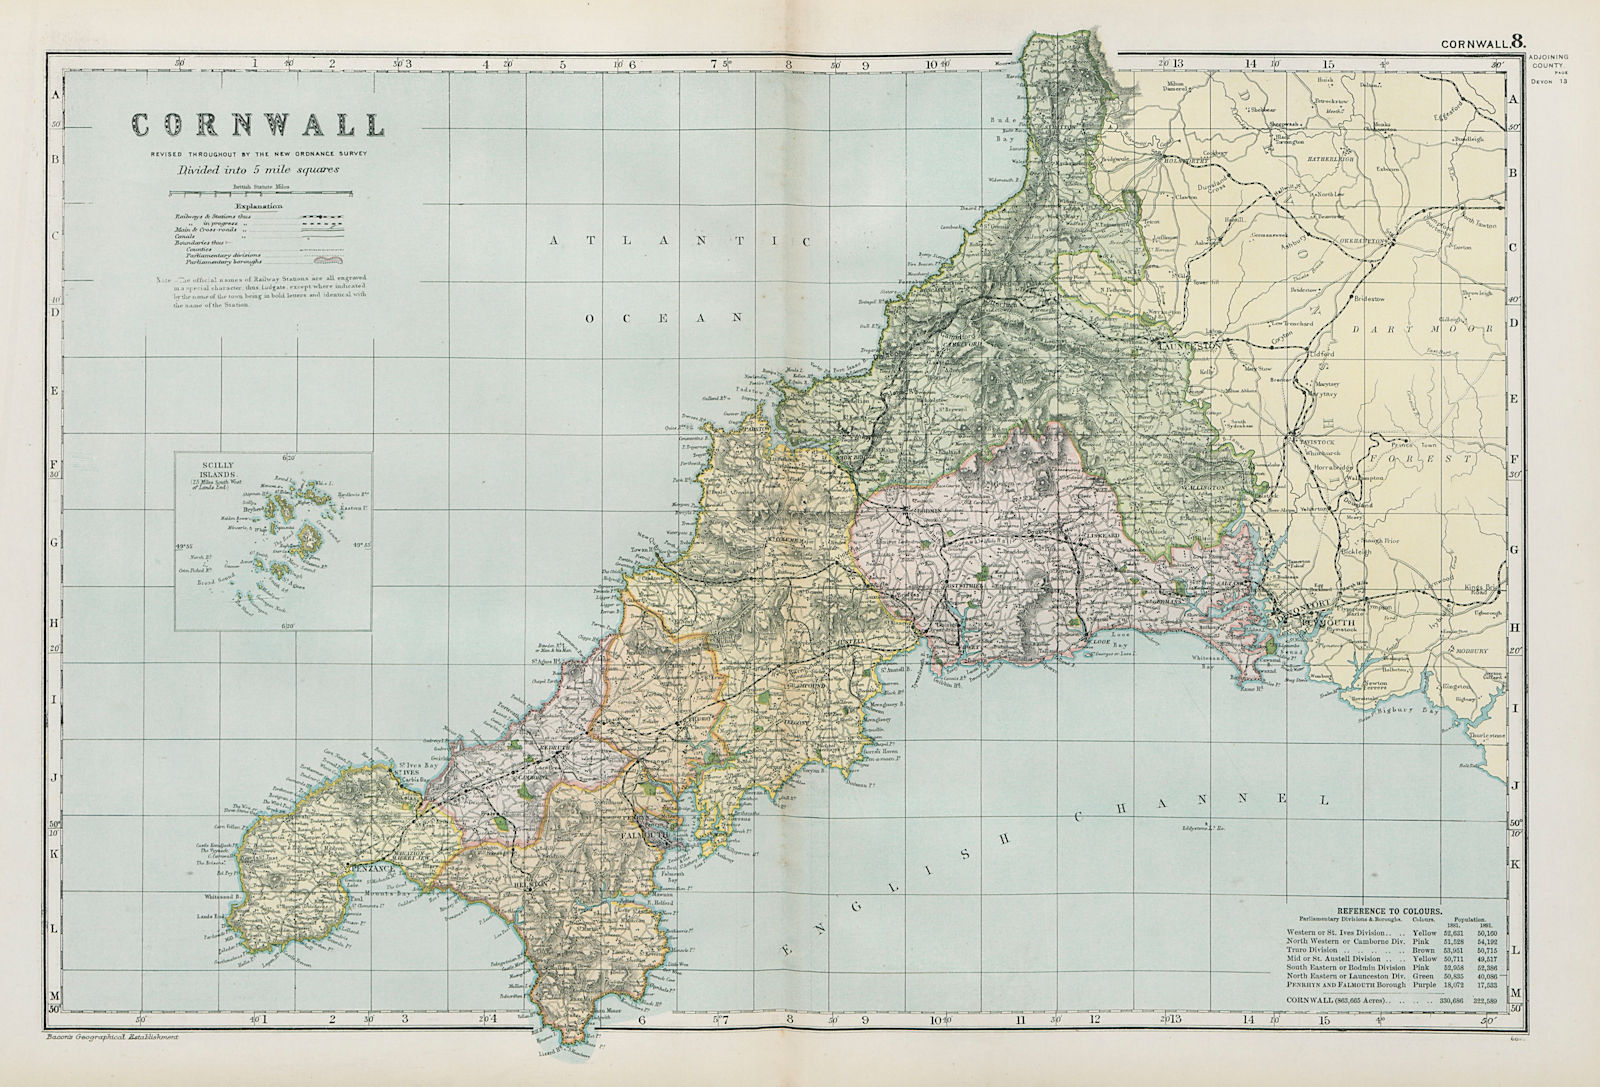 CORNWALL. Showing Parliamentary divisions, boroughs & parks. BACON 1900 map